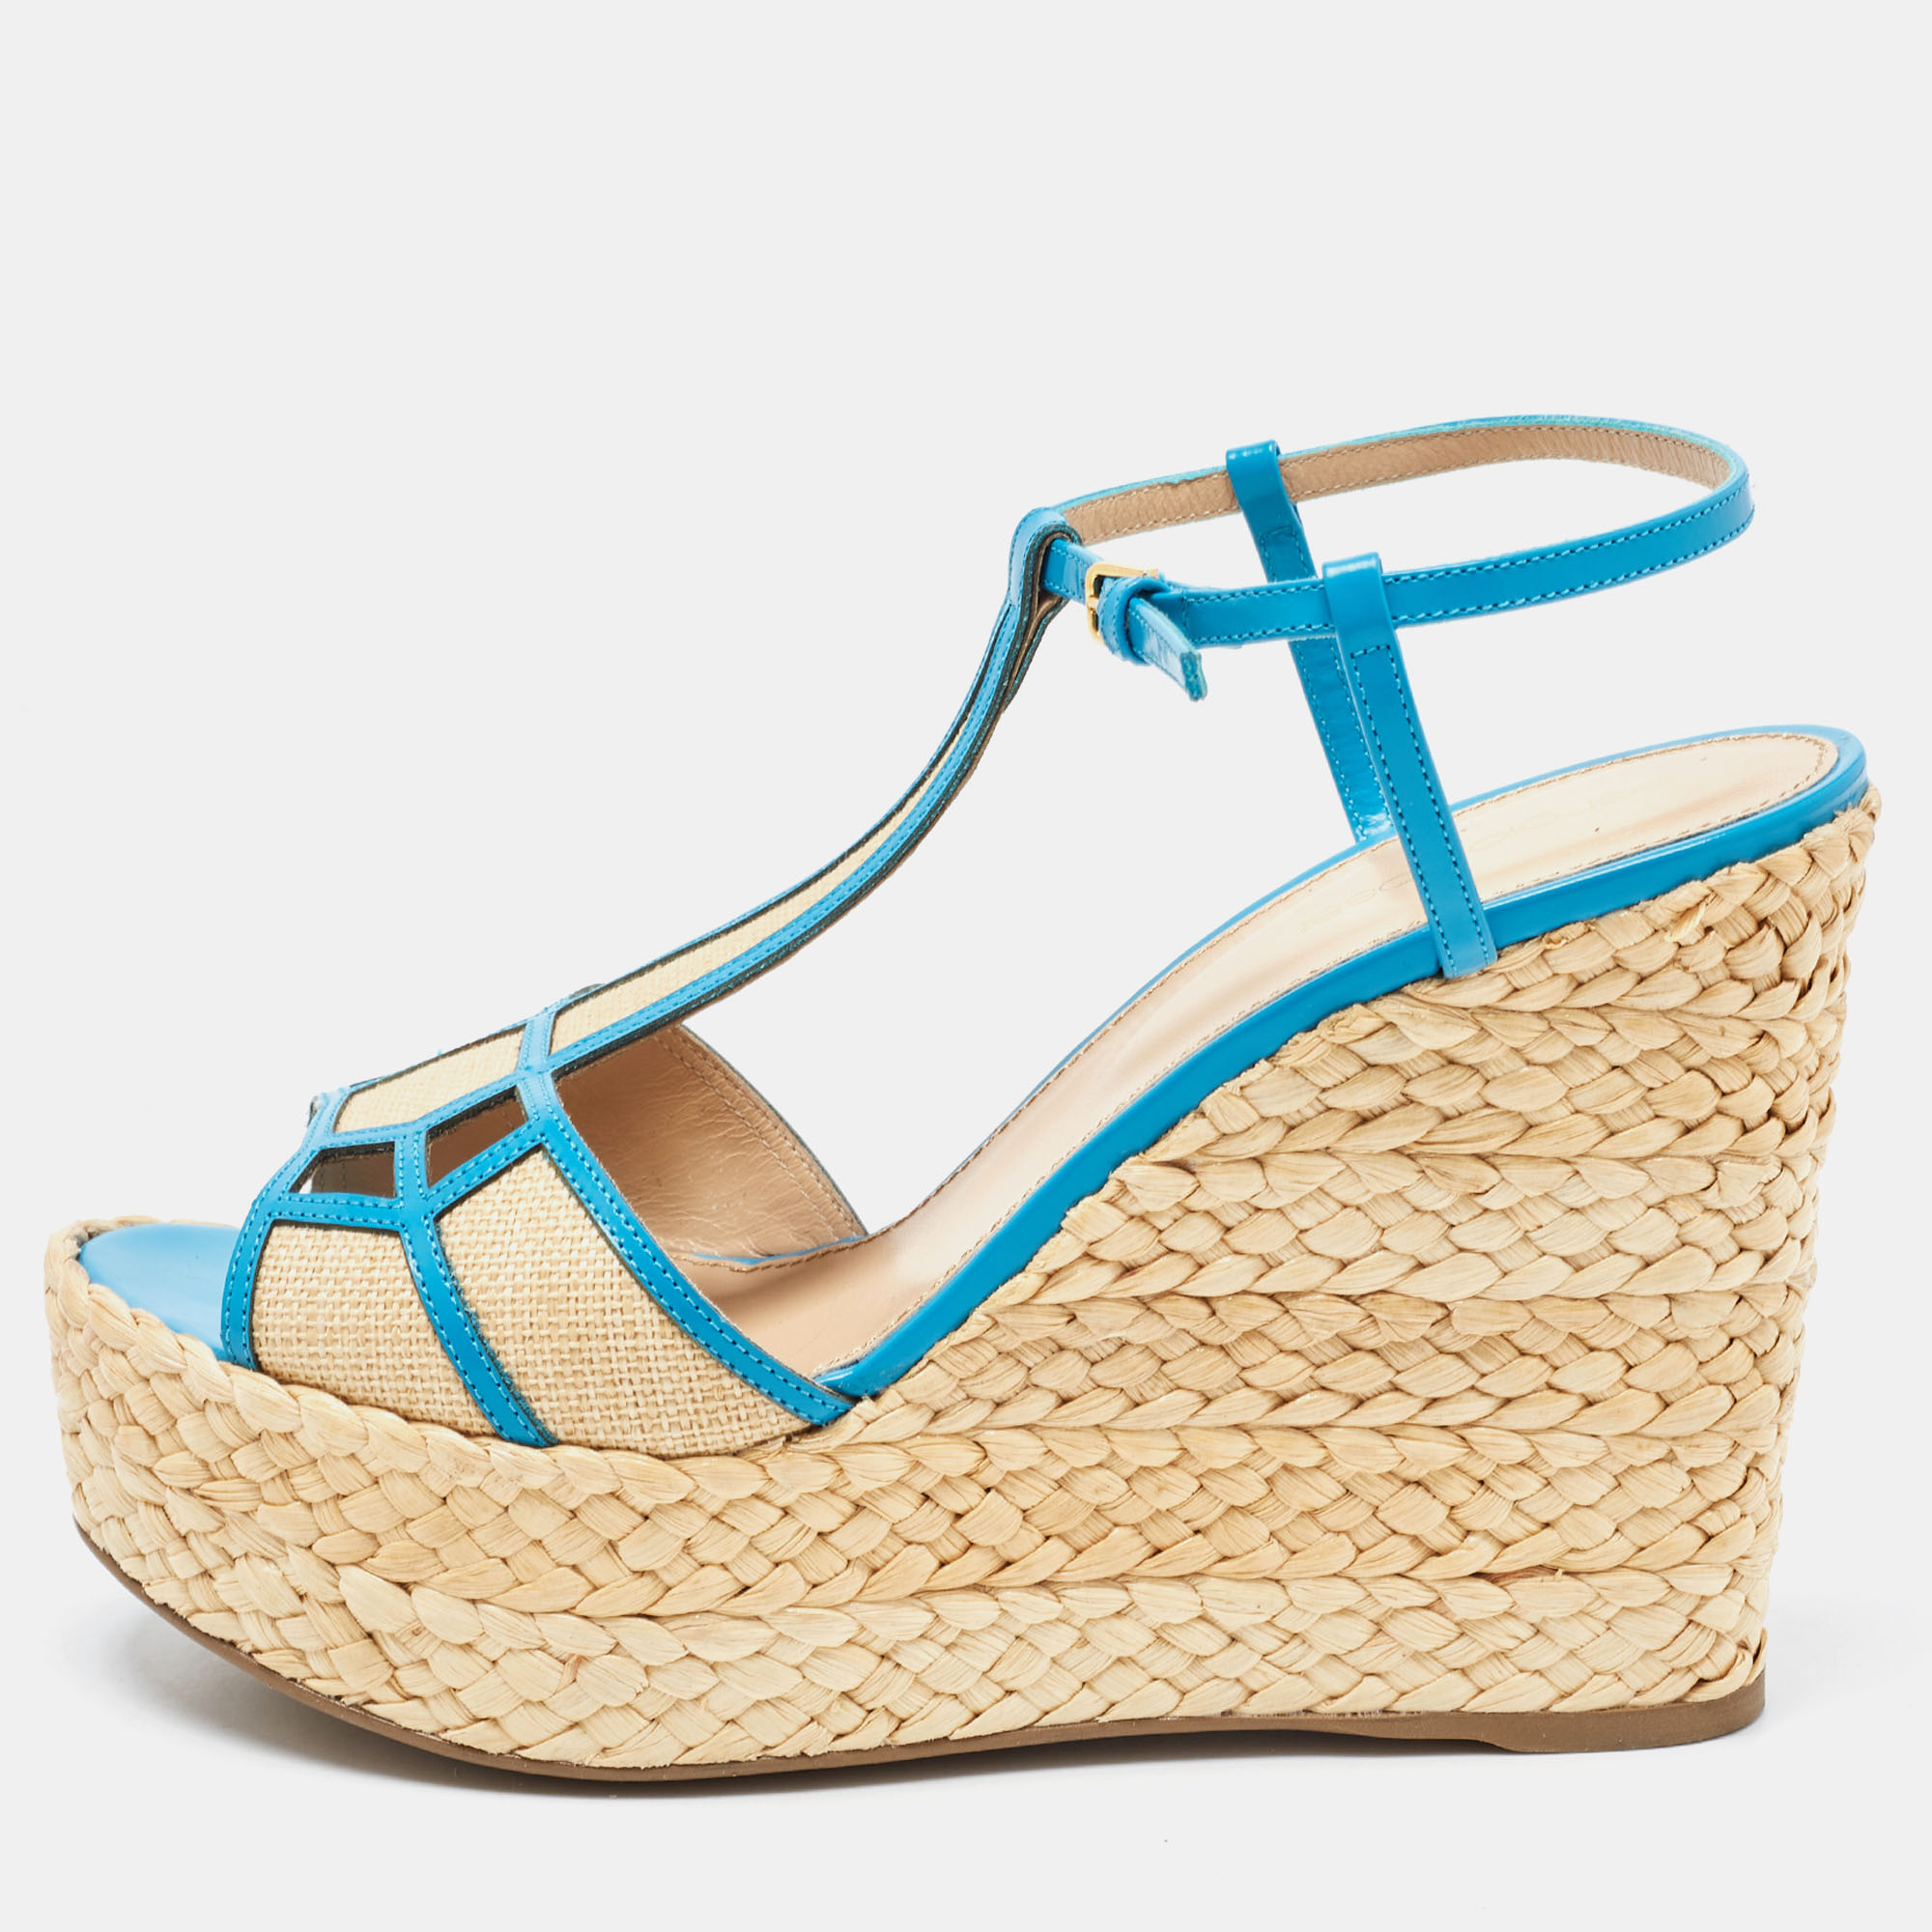 Pre-owned Sergio Rossi Blue/beige Leather And Raffia Ankle Strap Espadrille Wedge Sandals Size 39.5